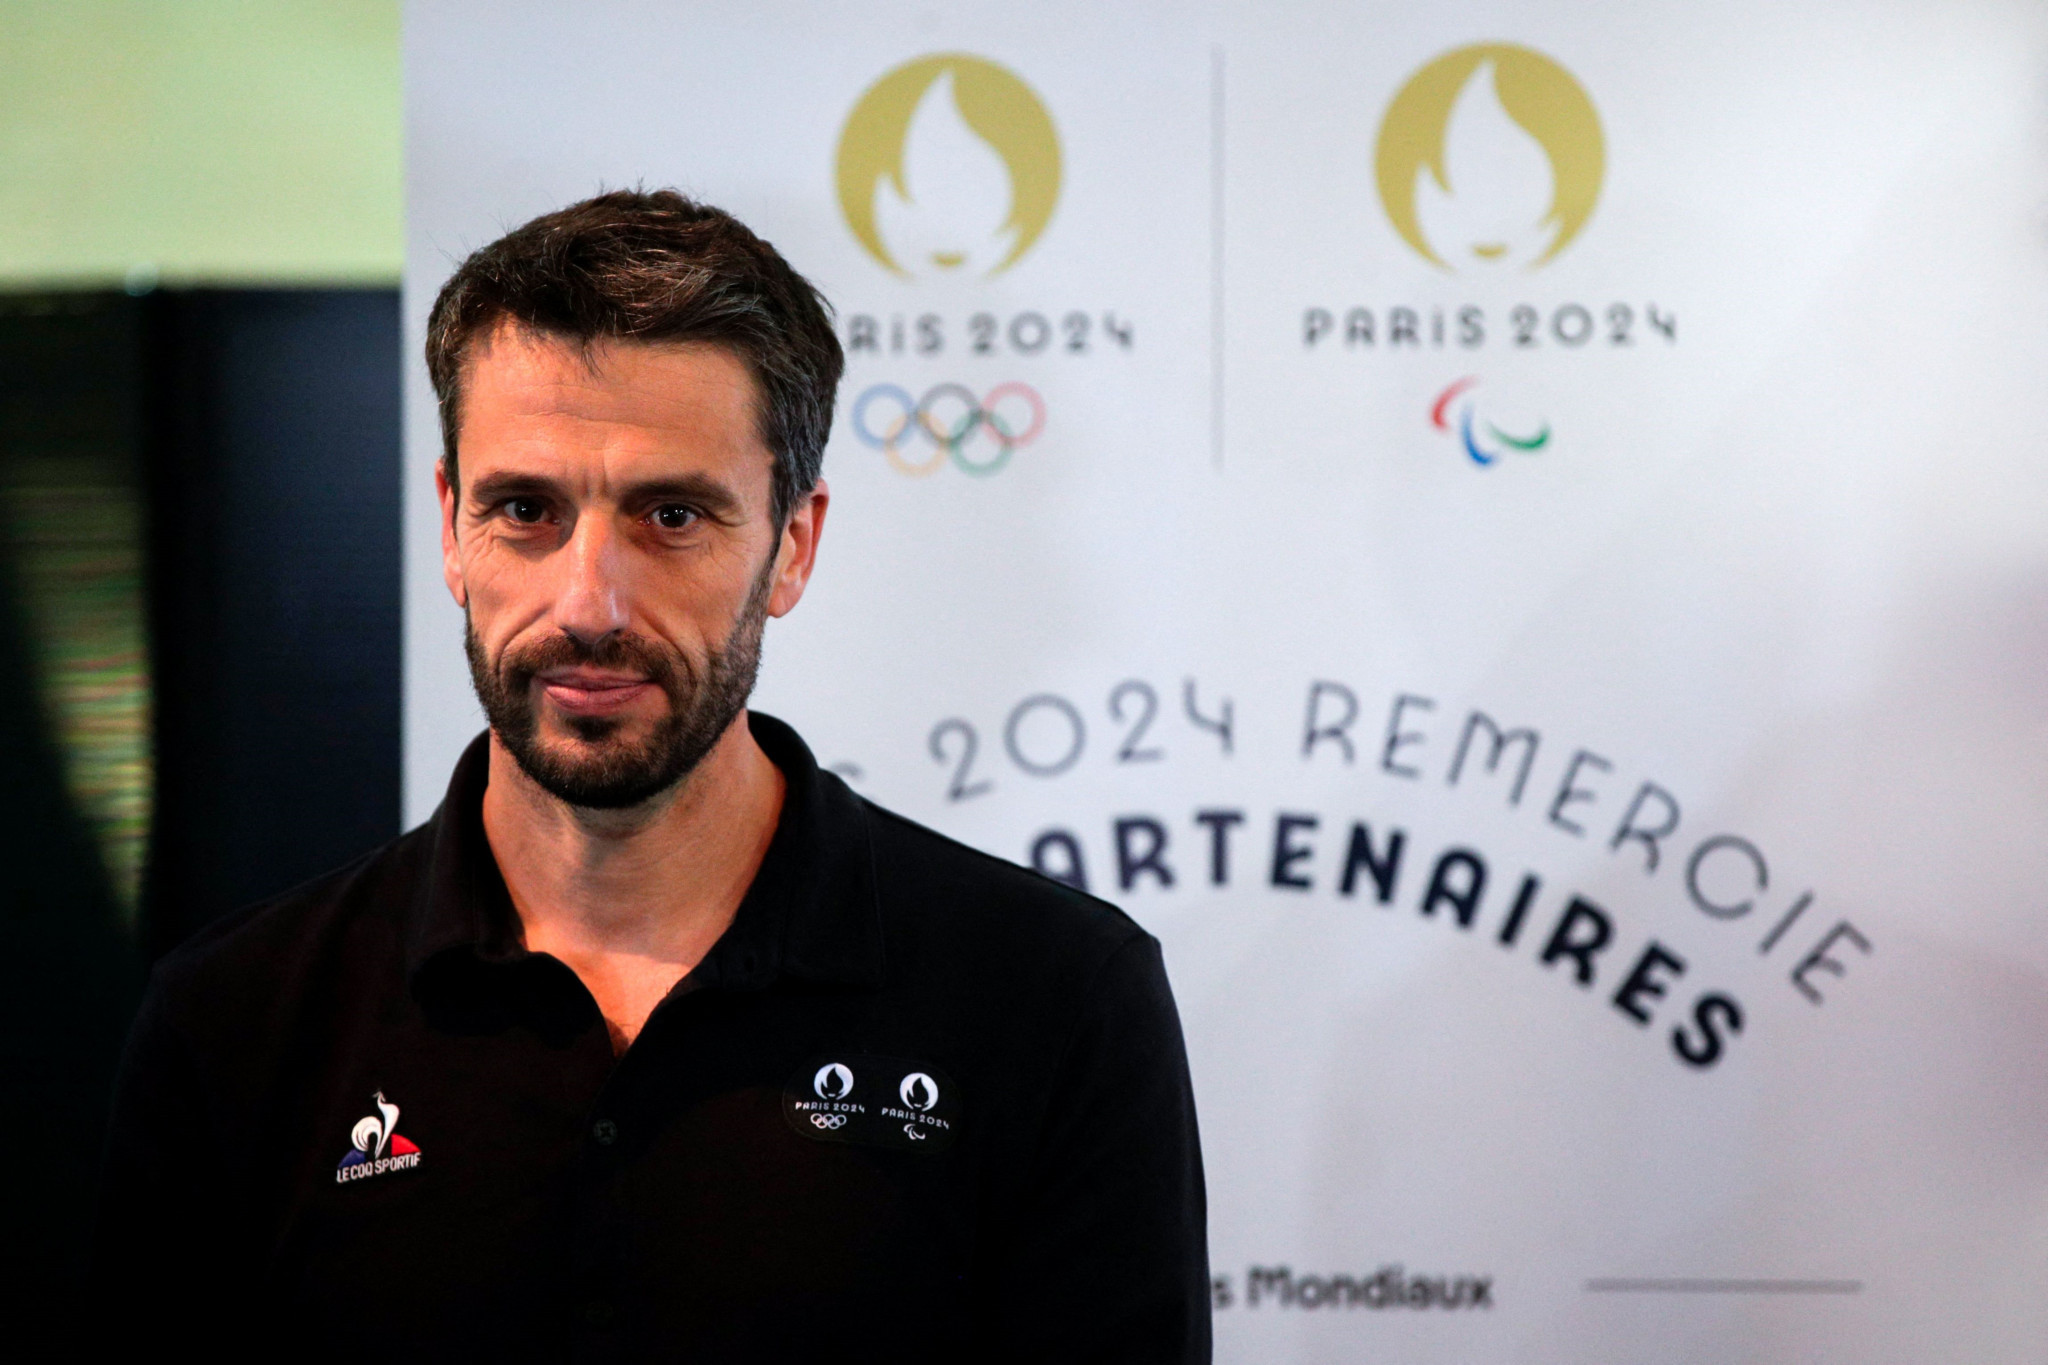 Paris 2024 President Tony Estanguet wants to increase the visibility of Para athletes throughout the world ©Getty Images